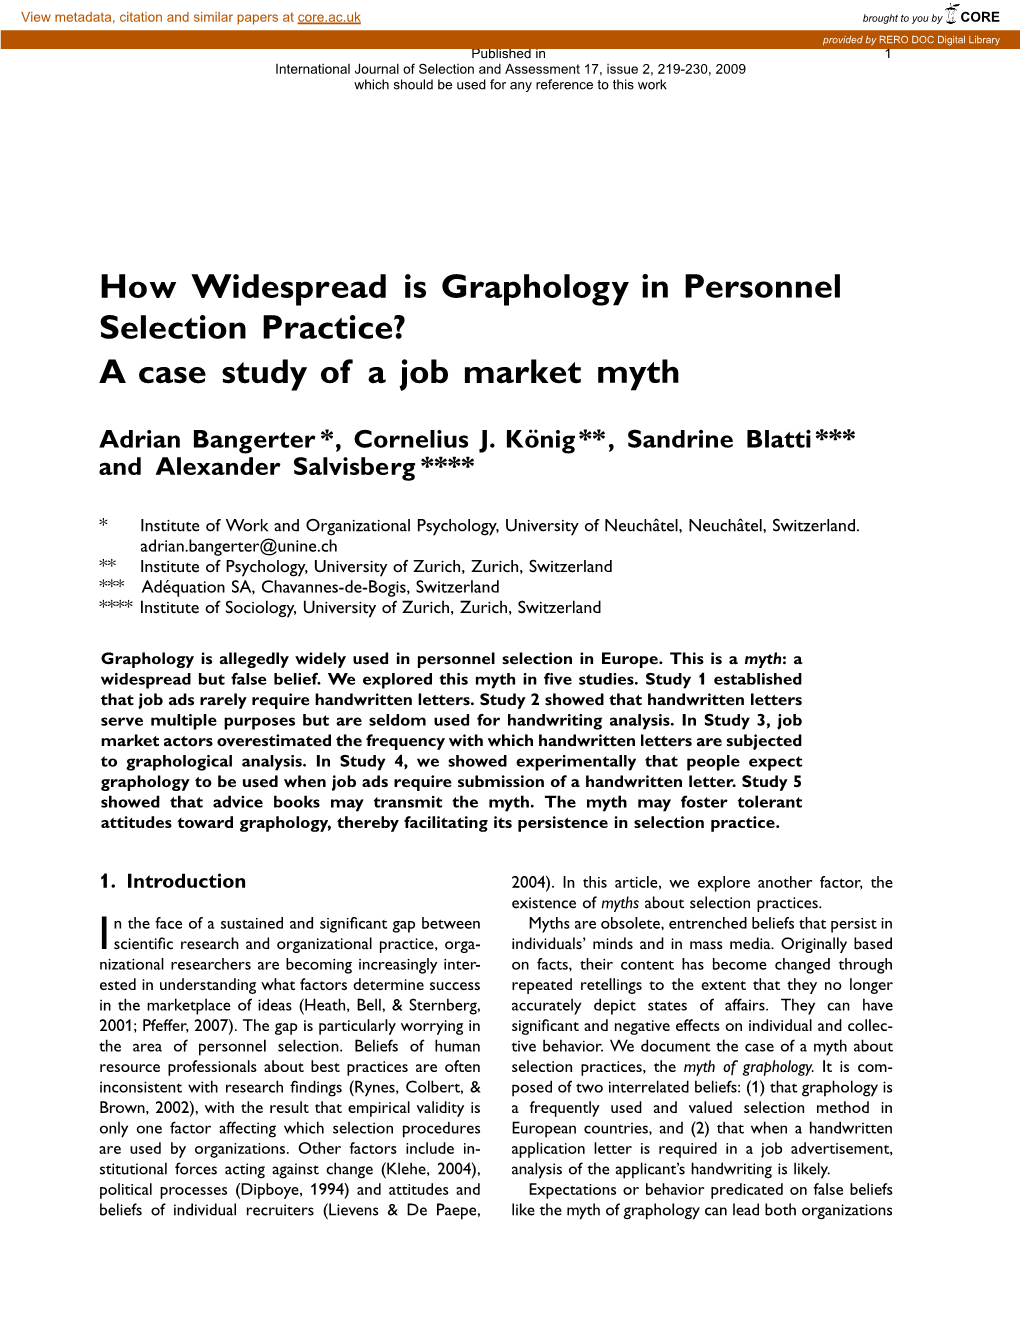 How Widespread Is Graphology in Personnel Selection Practice? a Case Study of a Job Market Myth